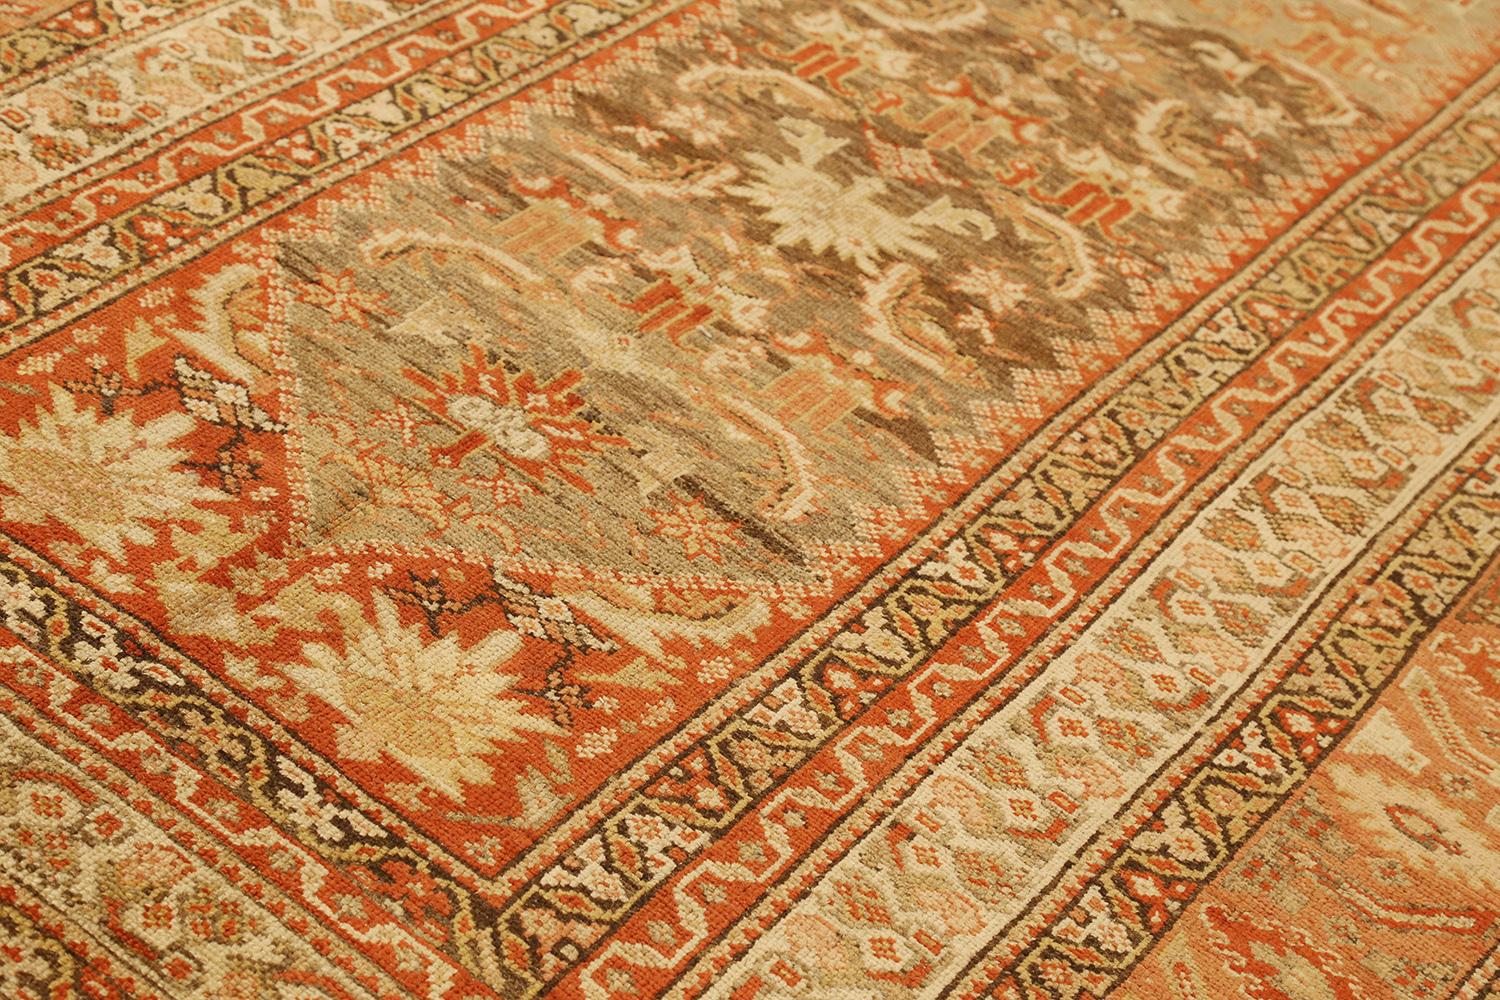 Hand-Woven Antique Persian Malayer Rug with Ivory and Brown Botanical Details on Red Field For Sale